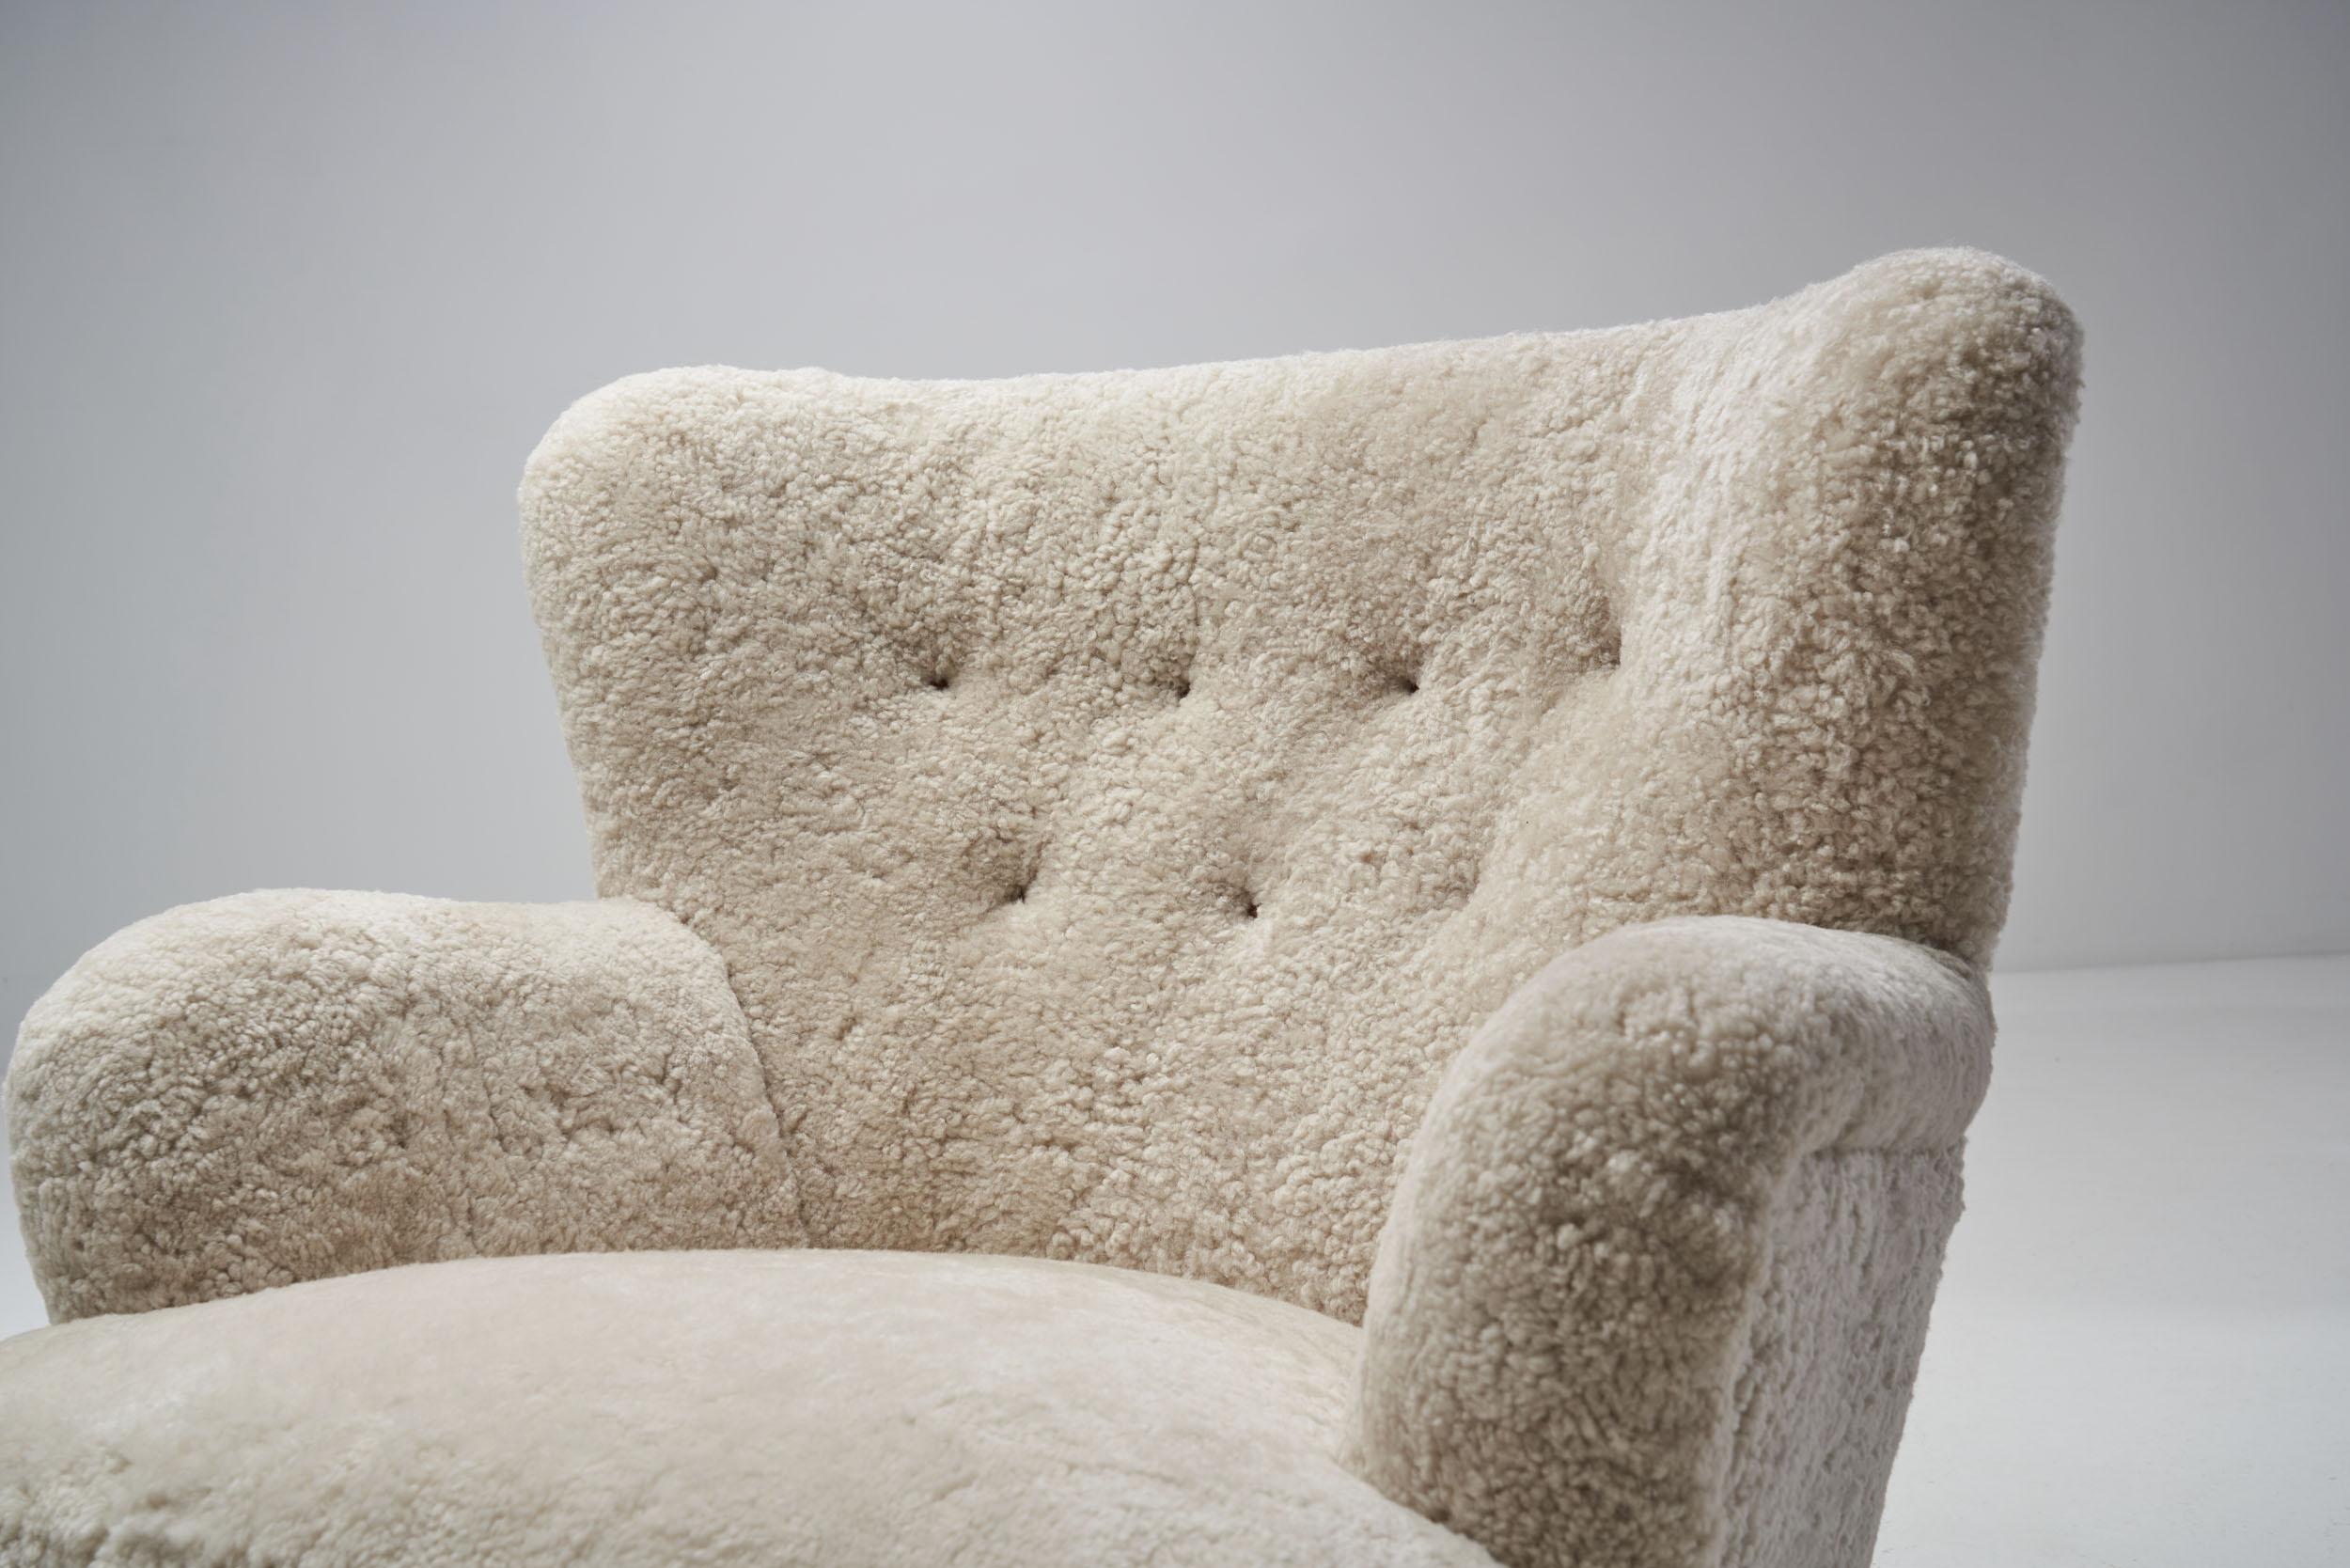 Pair of “Laila” Armchairs in Sheepskin by Ilmari Lappalainen, Finland 1948 For Sale 3